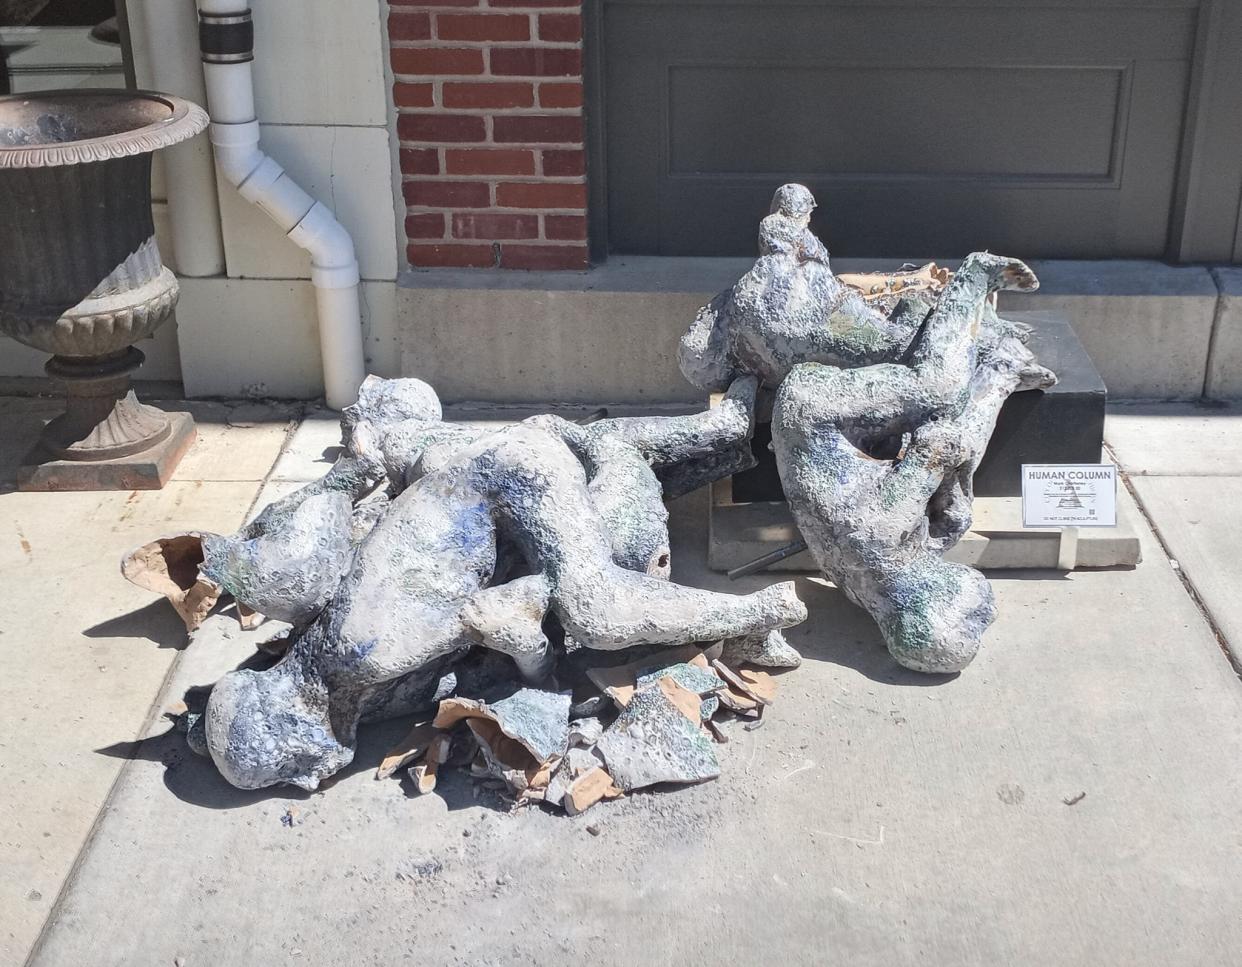 The sculpture titled "Human Column" was vandalized Saturday, according to the Adrian Police Department. The sculpture was in front of Farver's at the Croswell in downtown Adrian. A suspect in the vandalism had been apprehended as of Monday, Adrian police said.